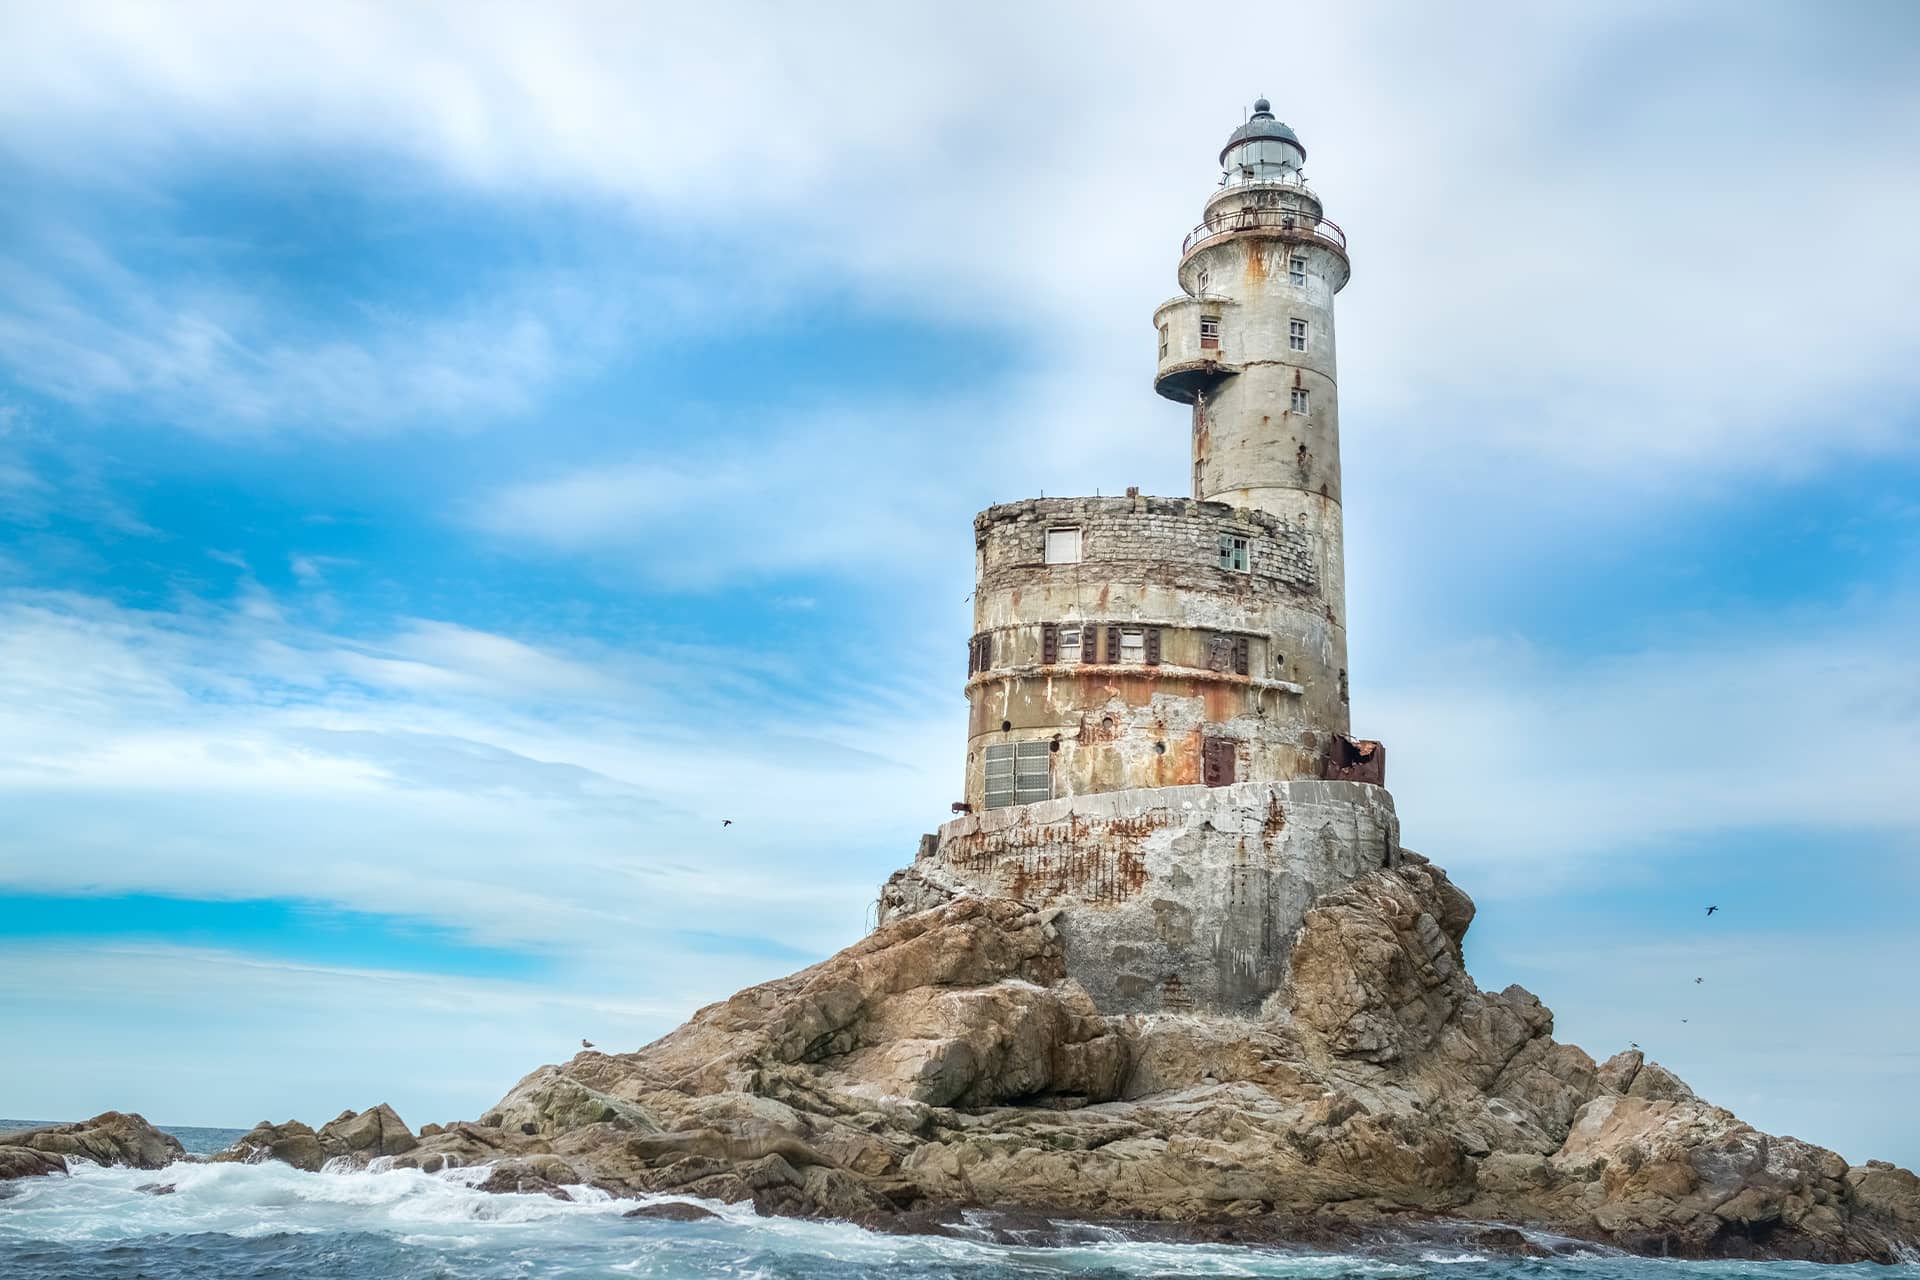 A picturesque lighthouse in the ocean on the top of a rock, ruined lighthouse